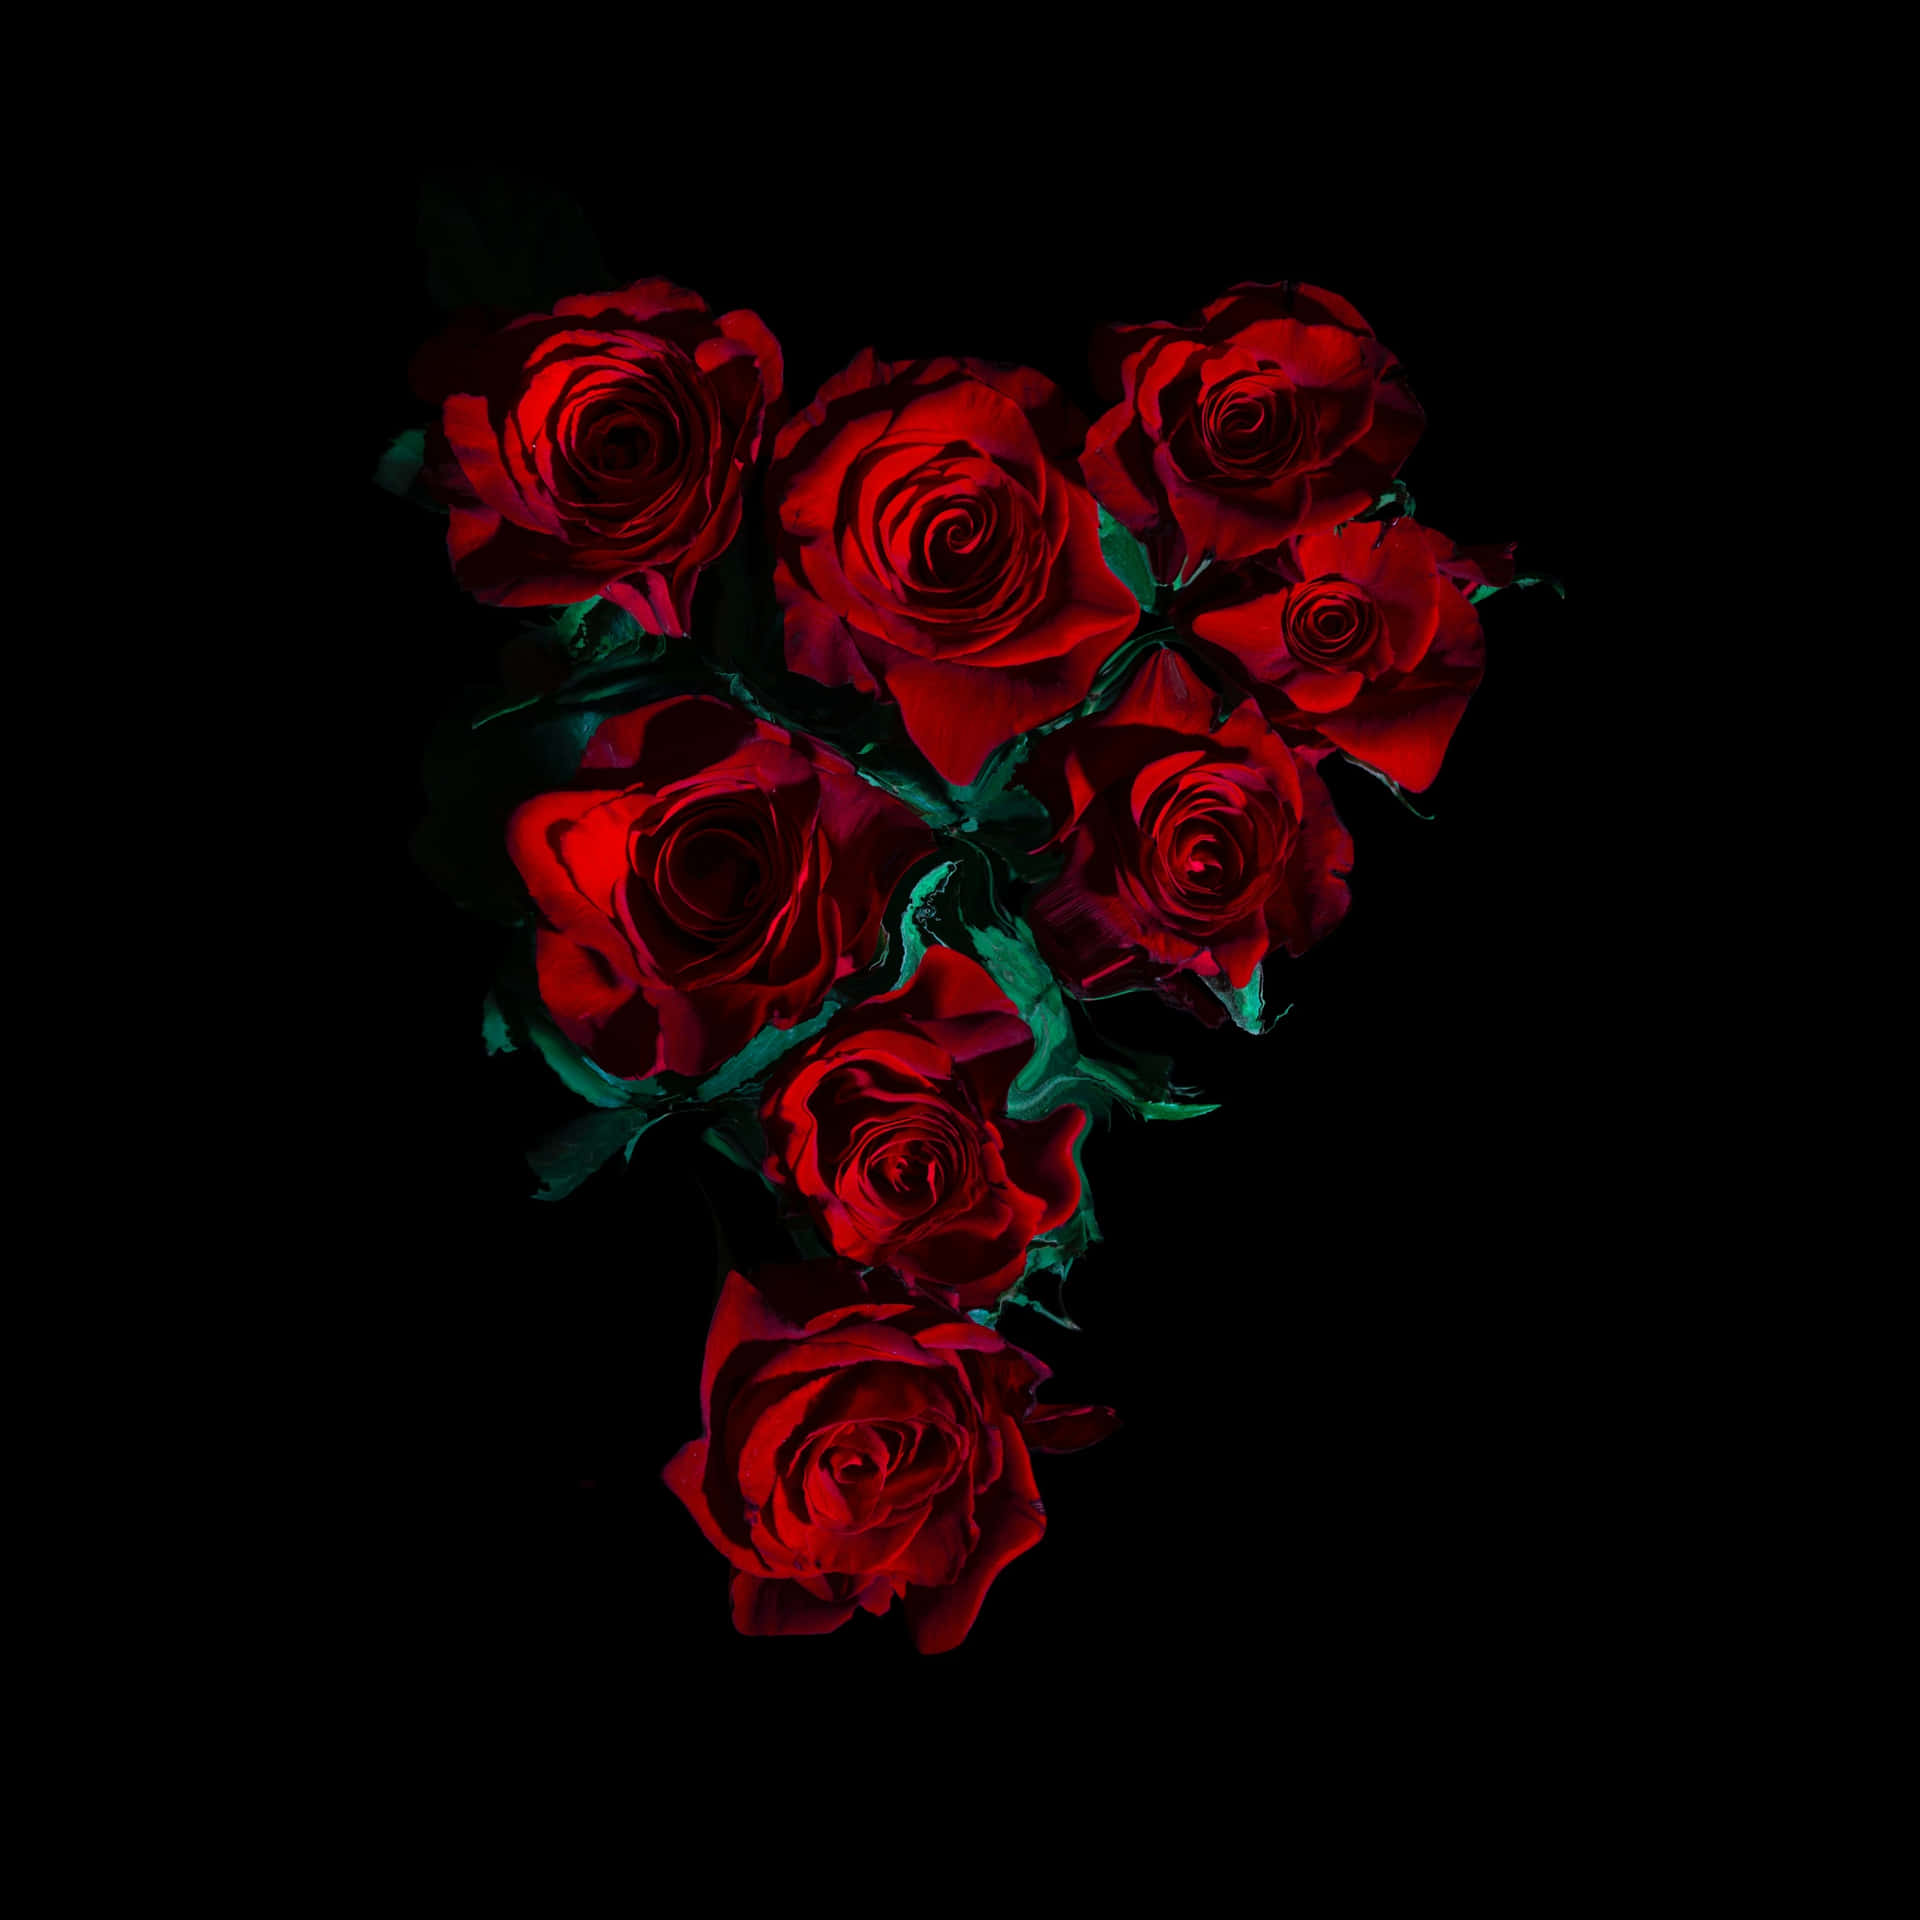 A Black Background With Red Roses On It Wallpaper